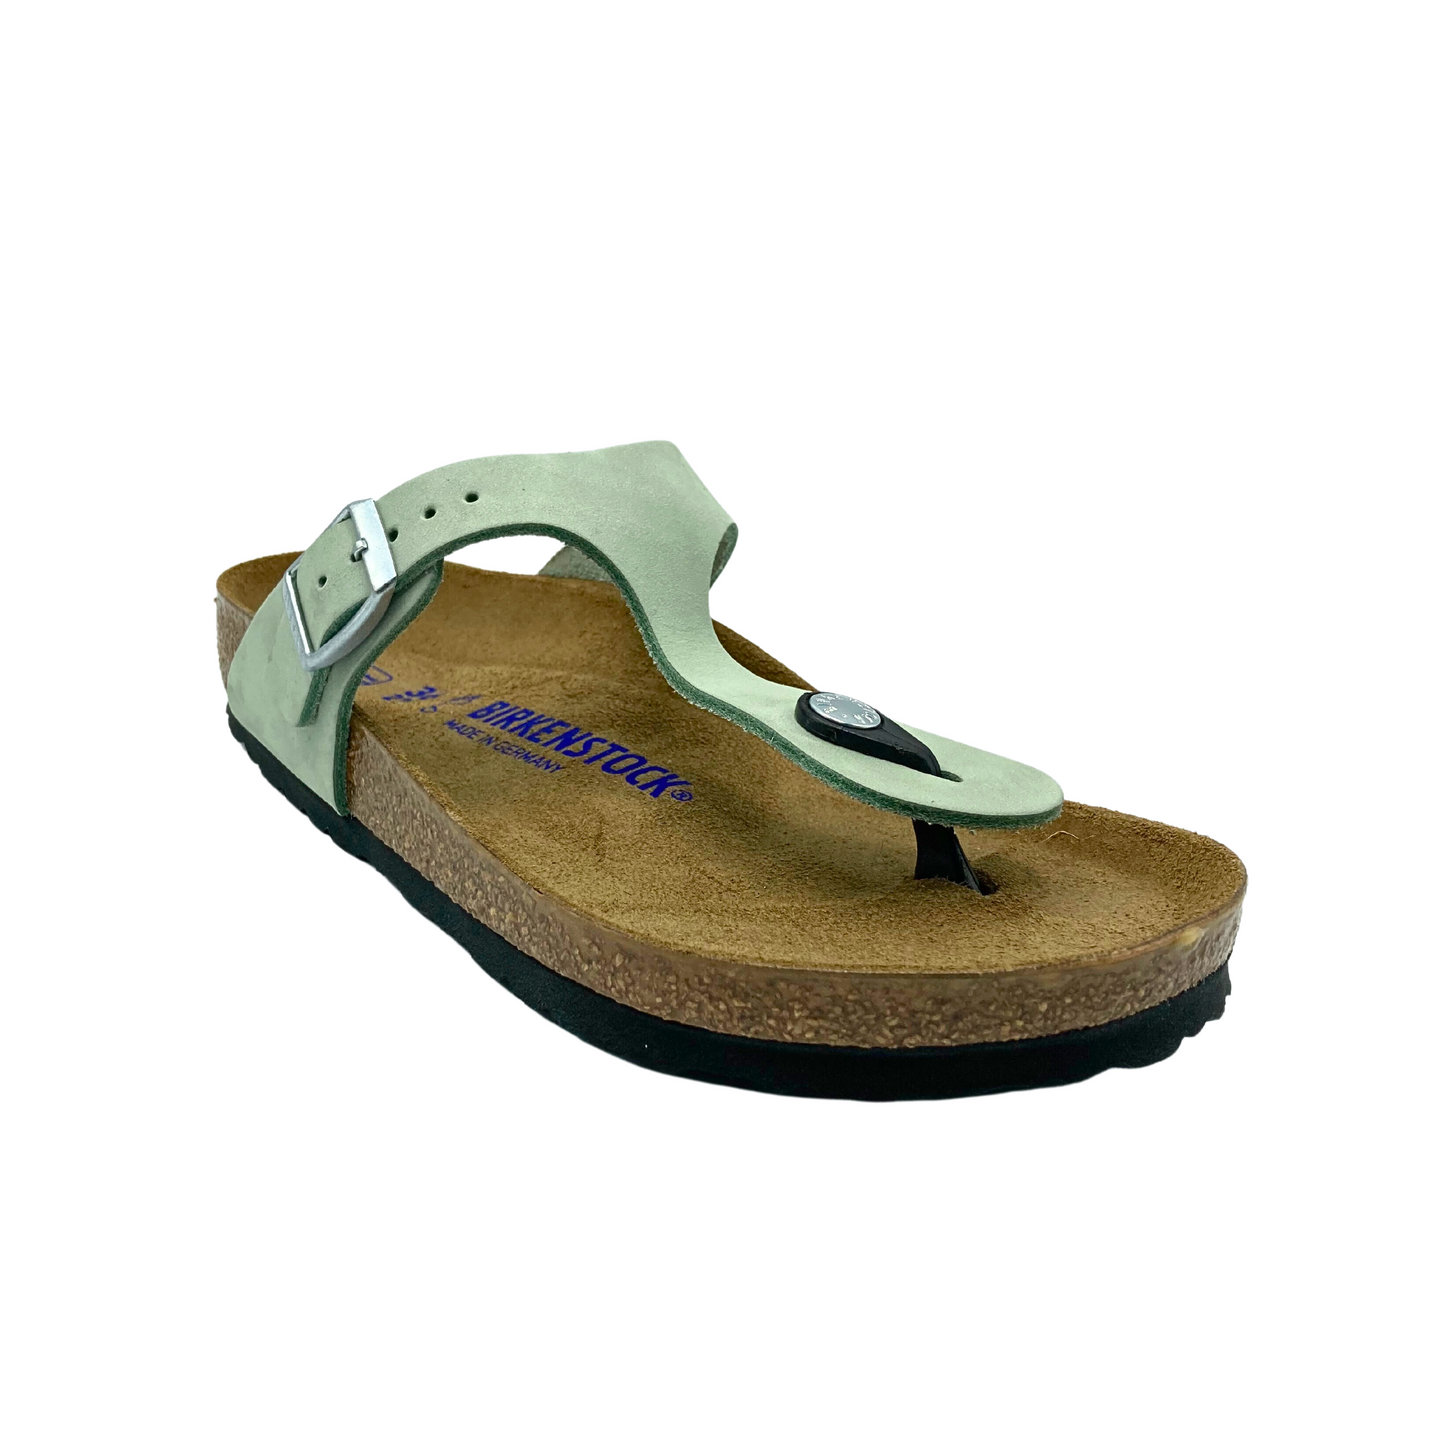 Angled front view of right shoe.  Toe post design with single top strap and adjustable buckle.